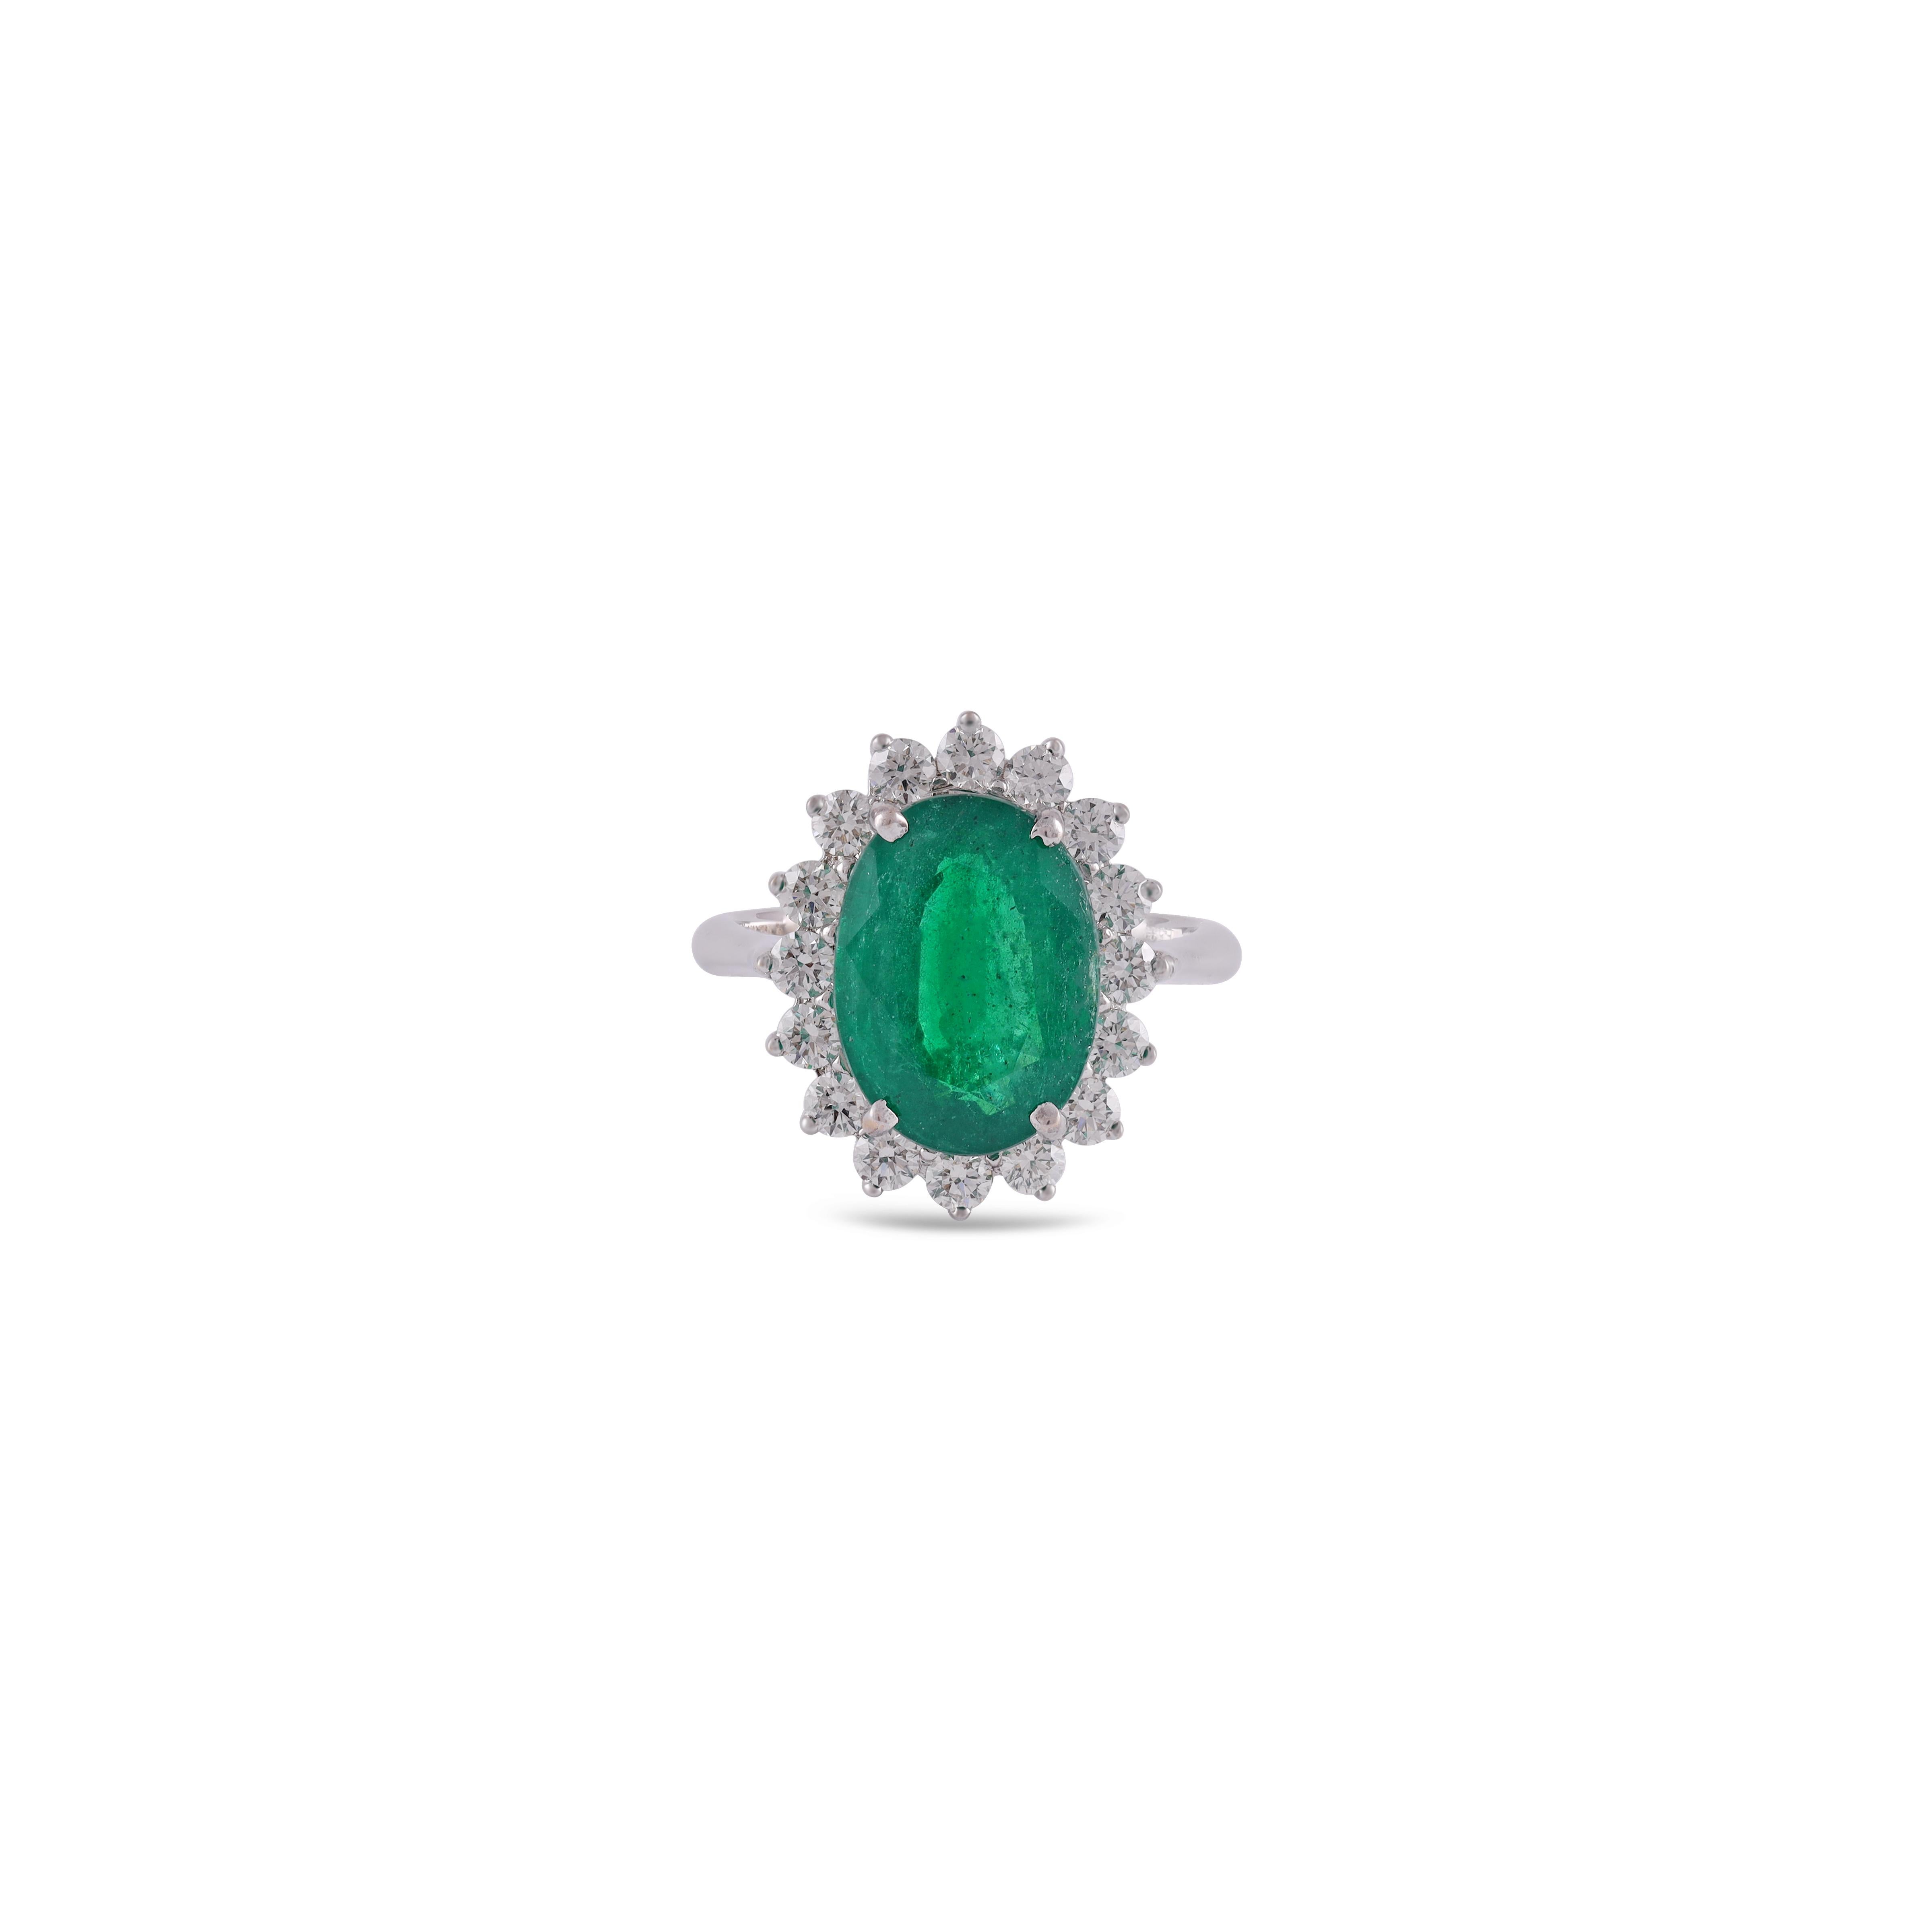 This is an elegant emerald & diamond ring studded in 18k White gold with 1 piece of  Zambian Clear High emerald weight 5.33 carat which is surrounded by 16 pieces of diamonds weight 0.93 carat, this entire ring studded in 18k White gold.



 Ring